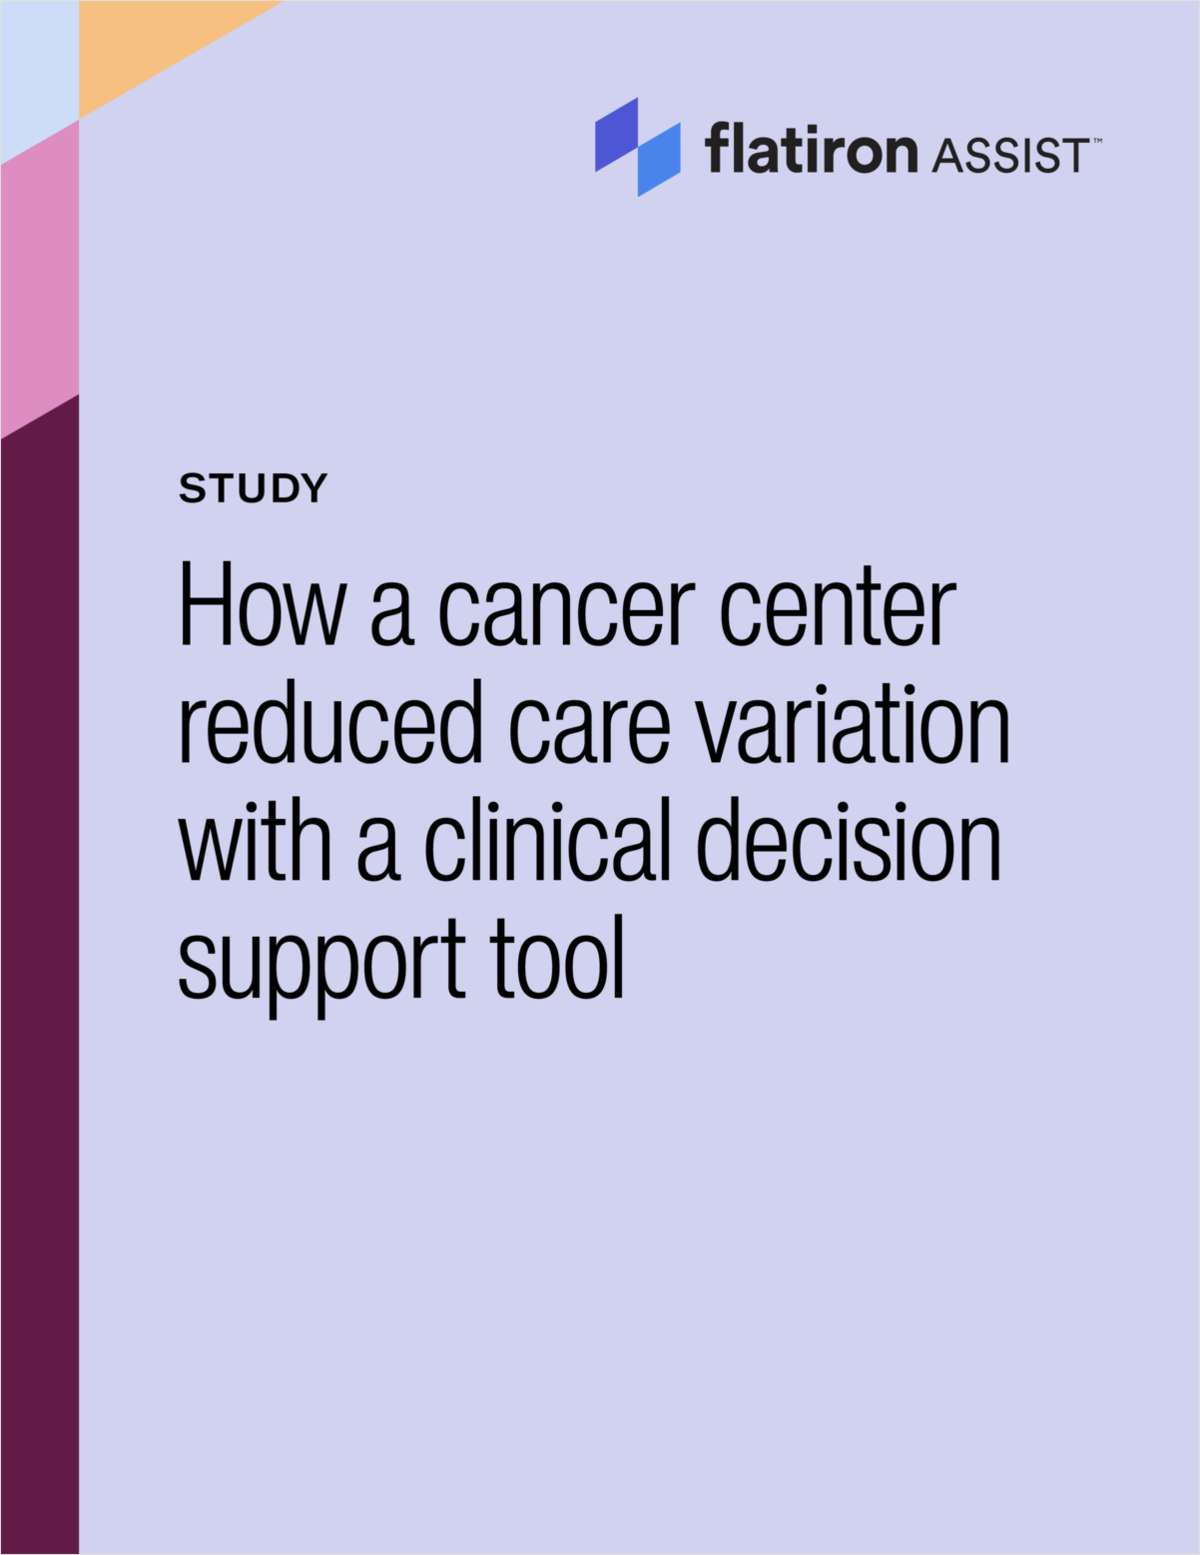 How a Cancer Center Reduced Care Variation Using an Oncology-Specific Clinical Decision Support Tool